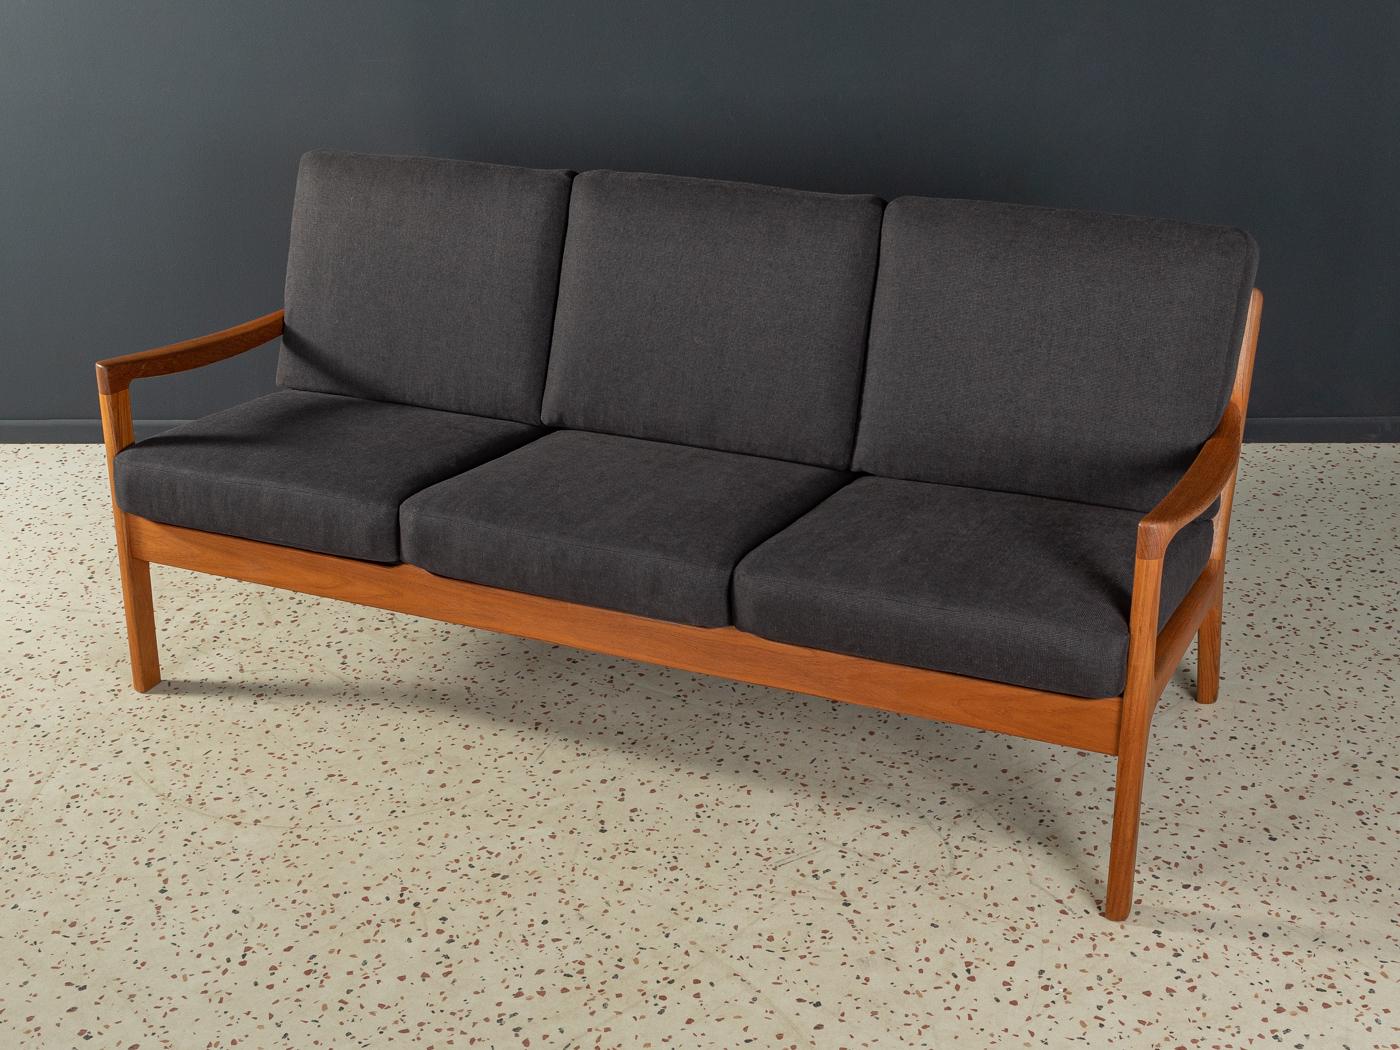 Classic 3-seater-sofa from the 1960s. Model Senator by Ole Wanscher for CADO. High-quality solid teak frame. The original spring core has been reupholstered and covered with a high-quality fabric in black.

Quality Features:
 accomplished design: